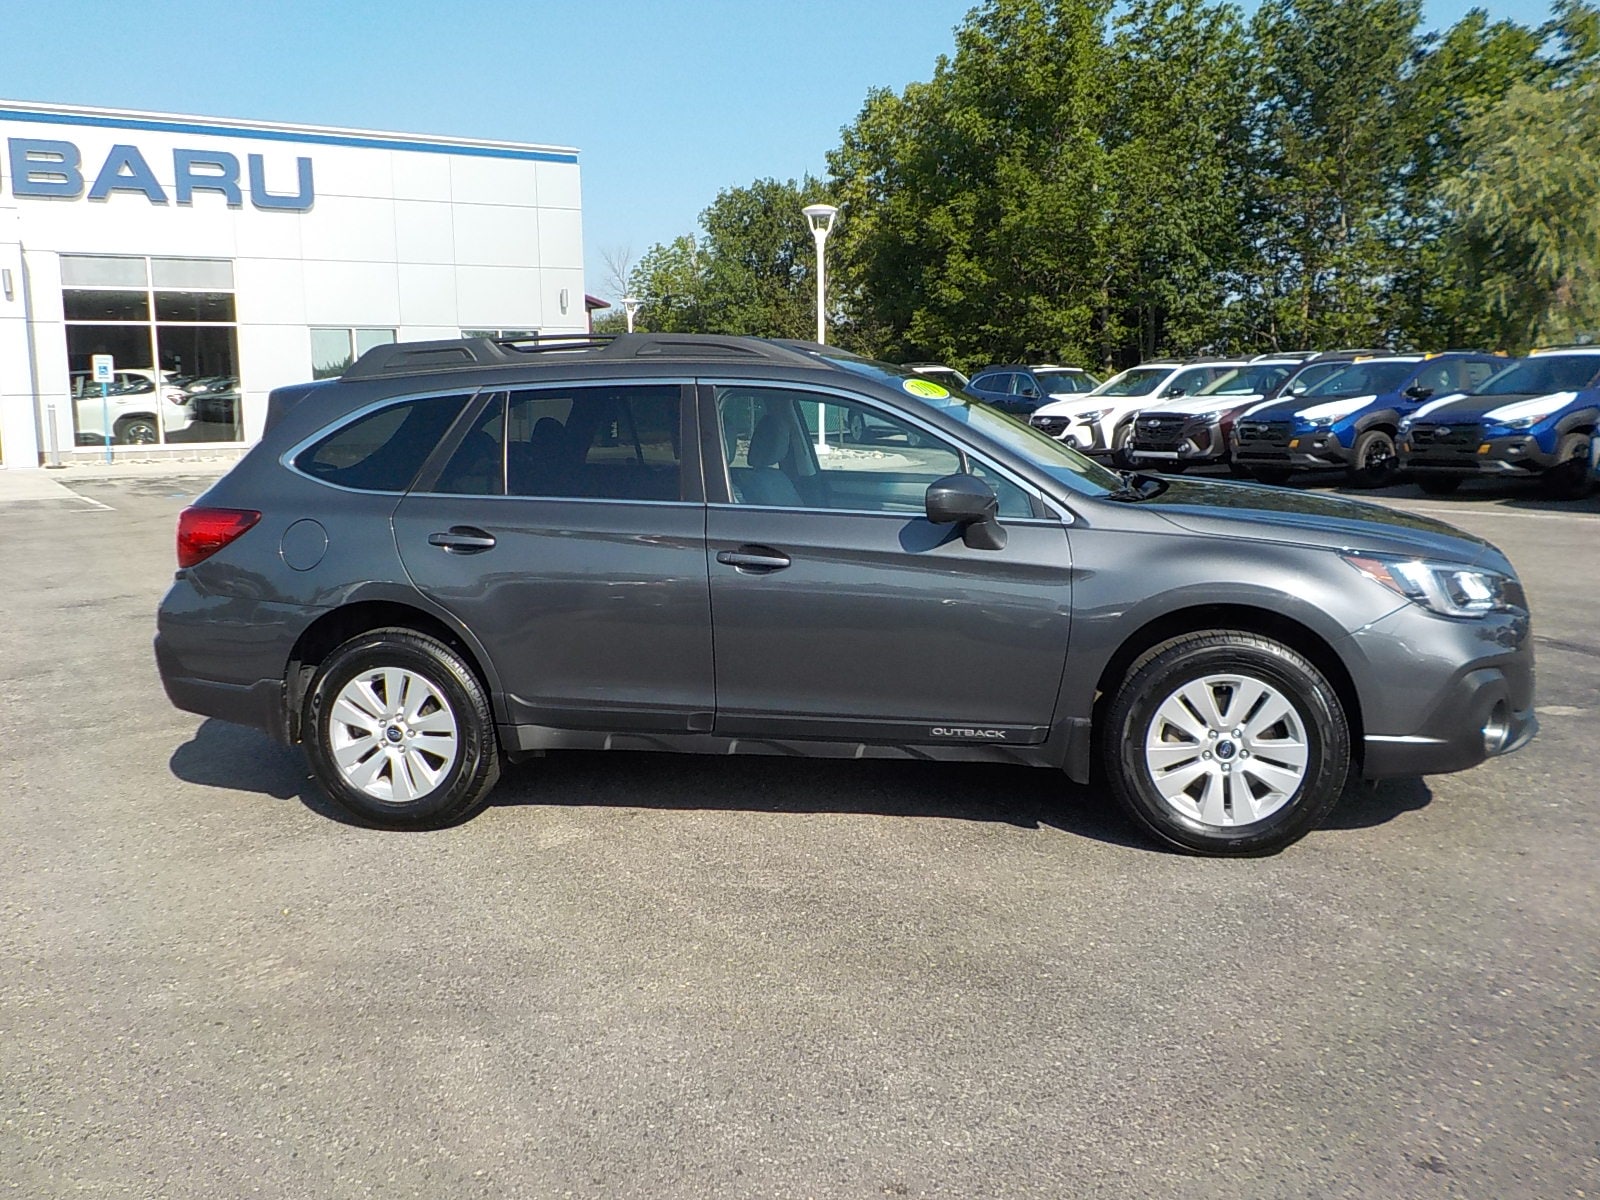 Used 2019 Subaru Outback Premium with VIN 4S4BSAFC6K3377018 for sale in Detroit Lakes, Minnesota